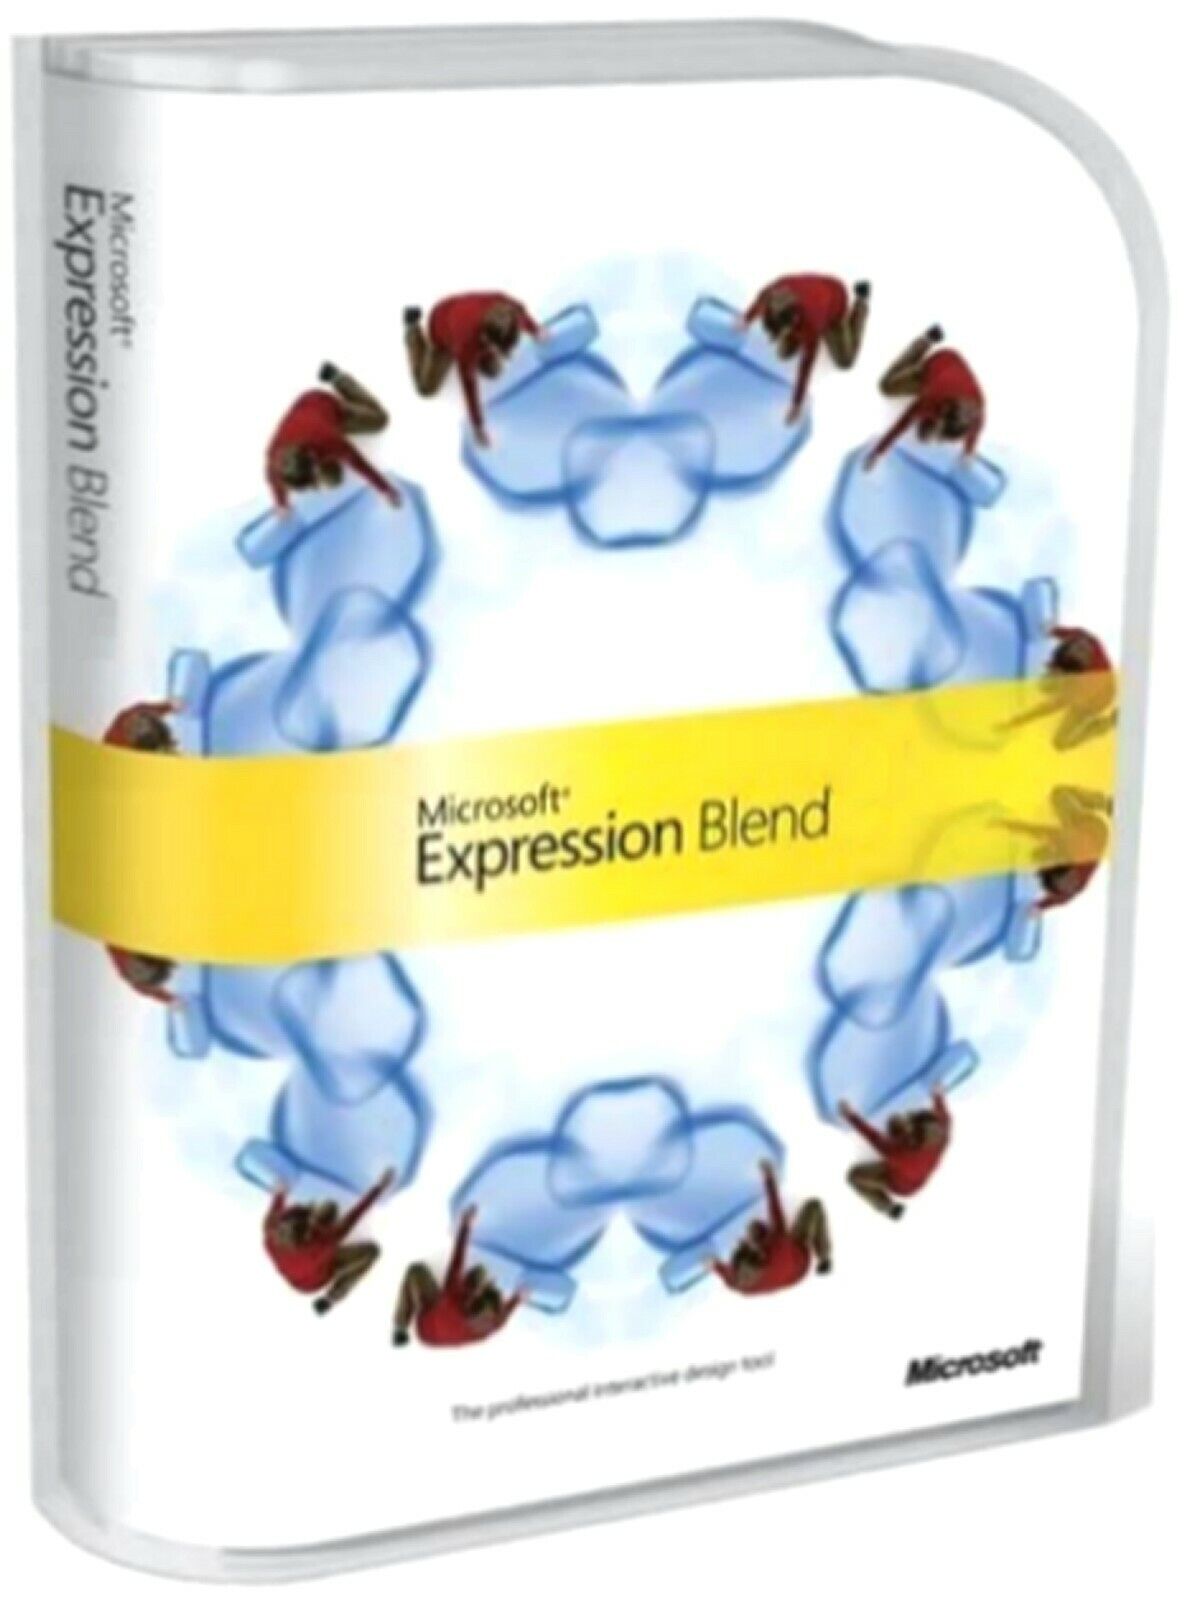 MICROSOFT EXPRESSION BLEND INCLUDES VISUAL STUDIO 2005. BRAND NEW RETAIL